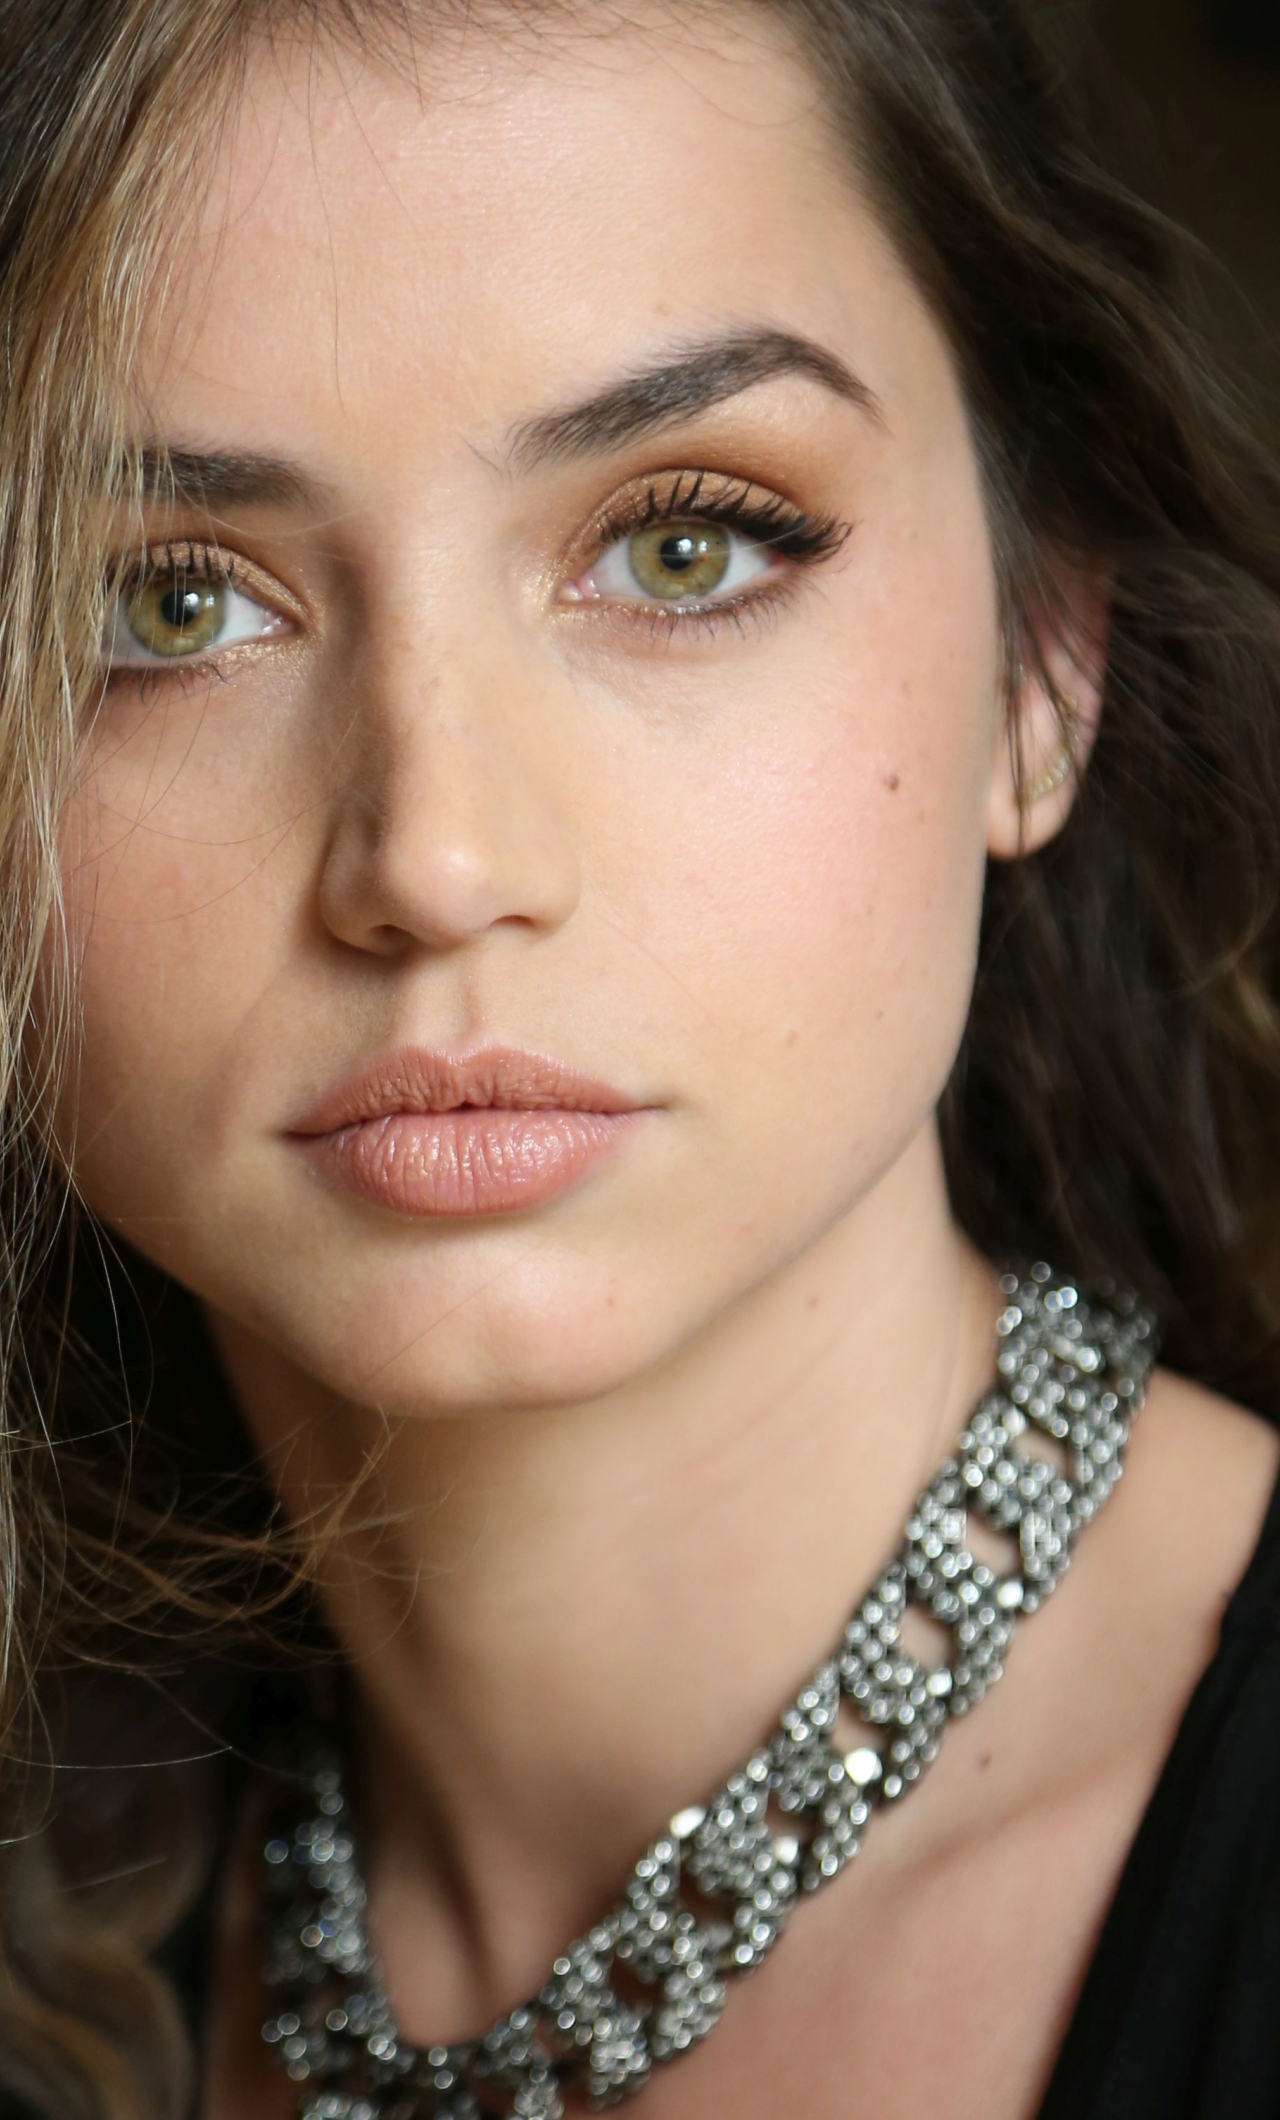 1280x21 Ana De Armas Beautiful Face Iphone 6 Plus Wallpaper Hd Celebrities 4k Wallpapers Images Photos And Background